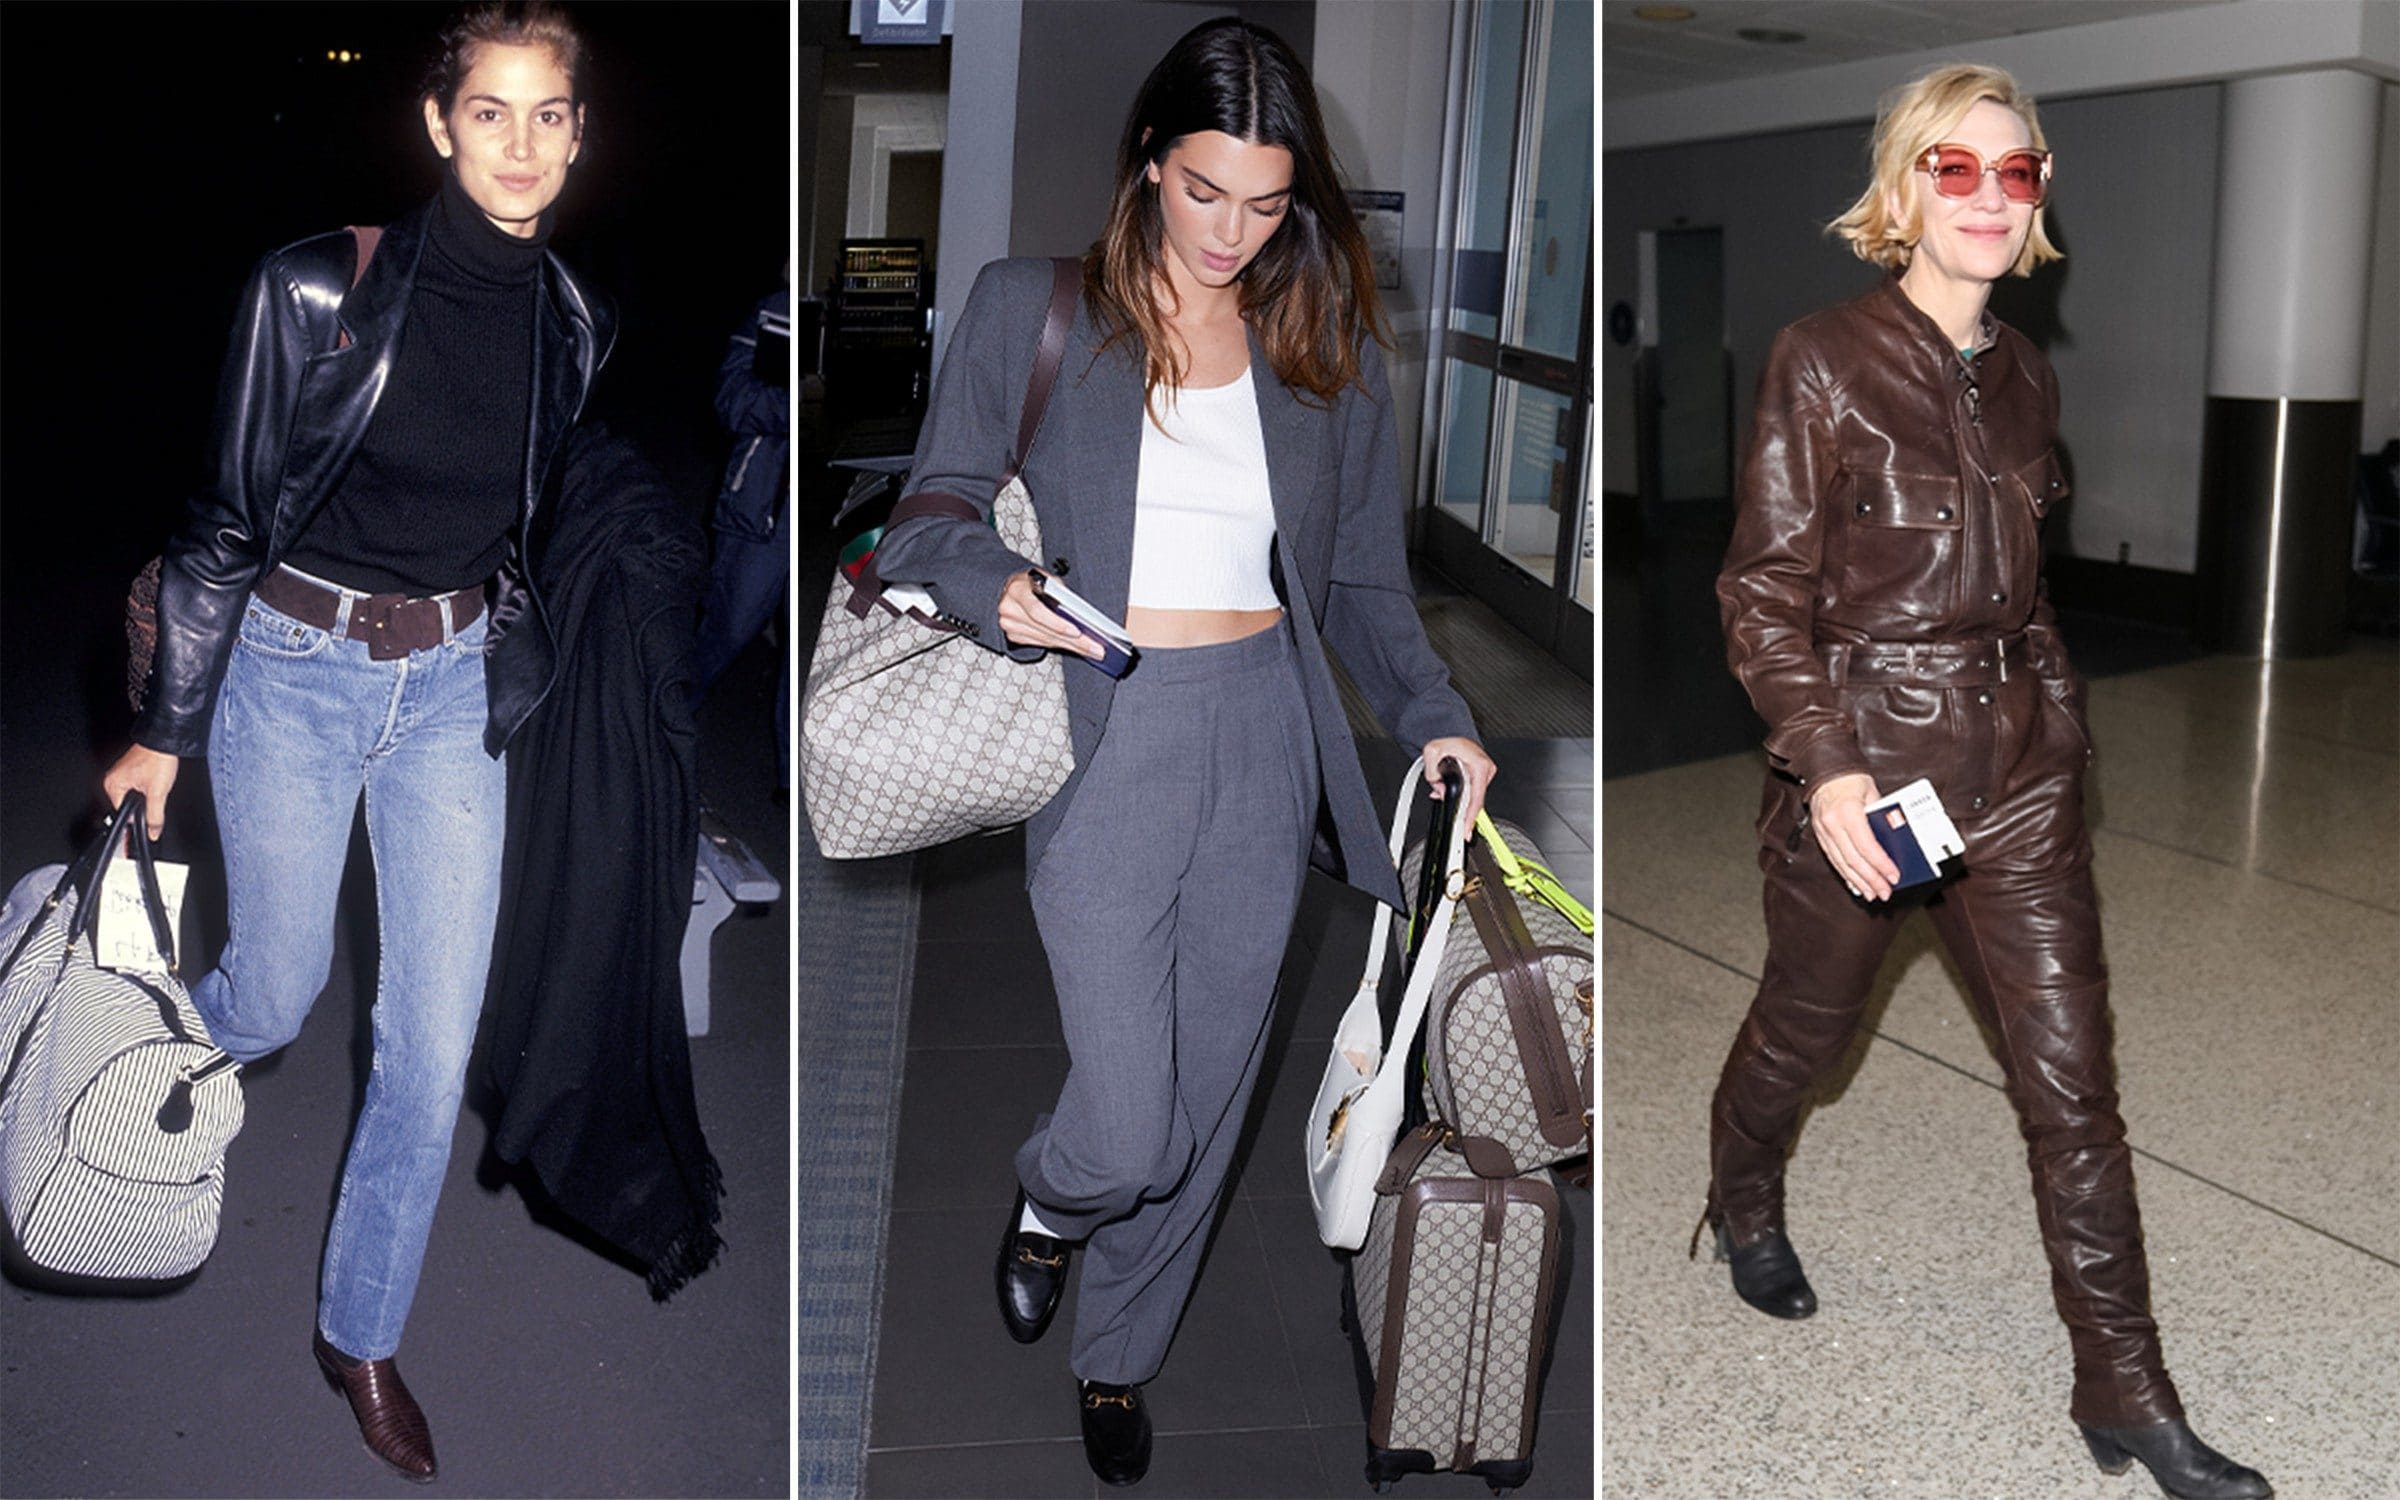 Three ways to look as chic as an A-lister at the airport this summer